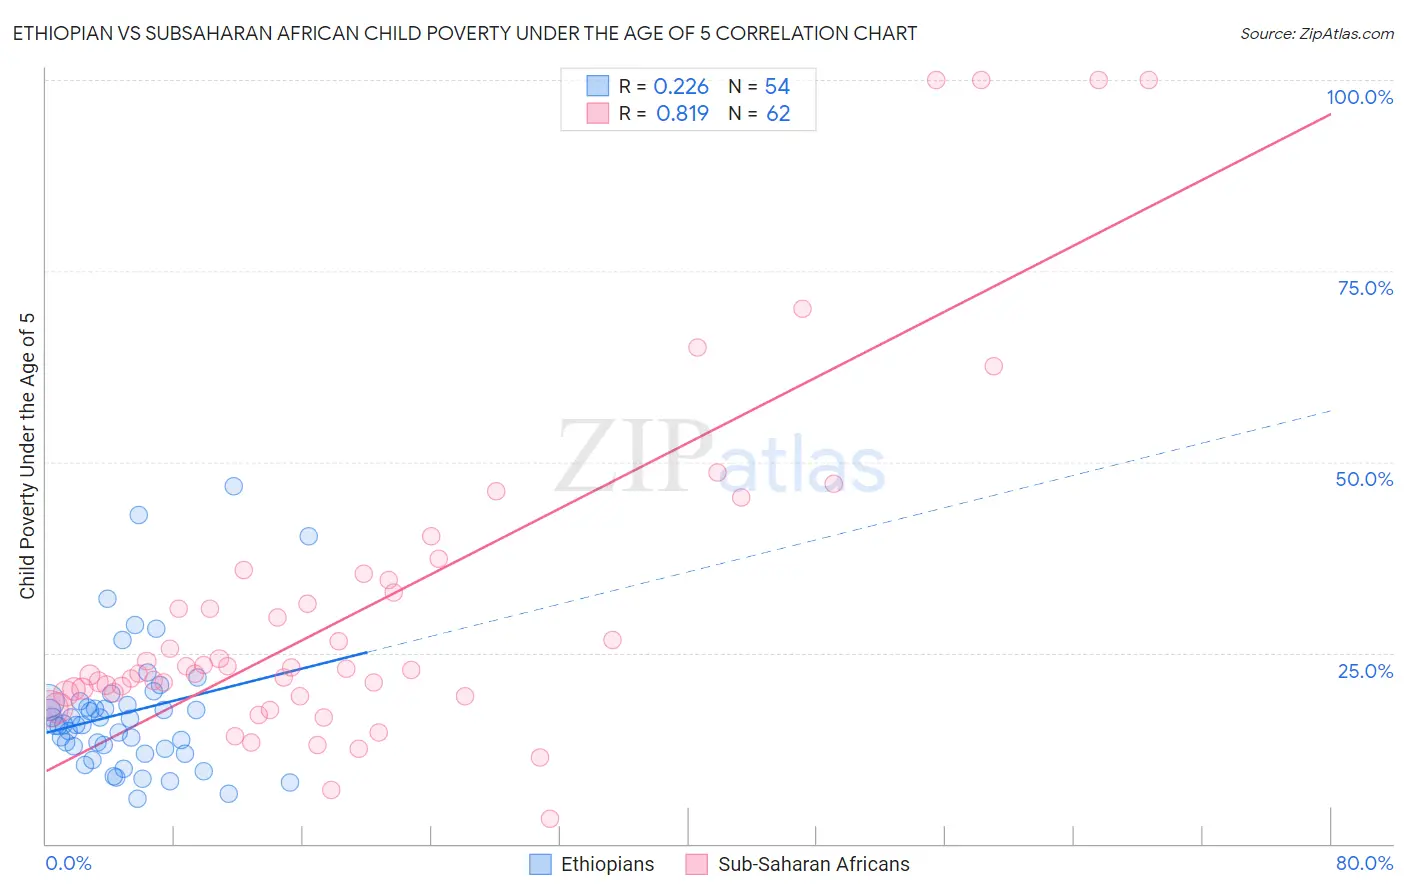 Ethiopian vs Subsaharan African Child Poverty Under the Age of 5